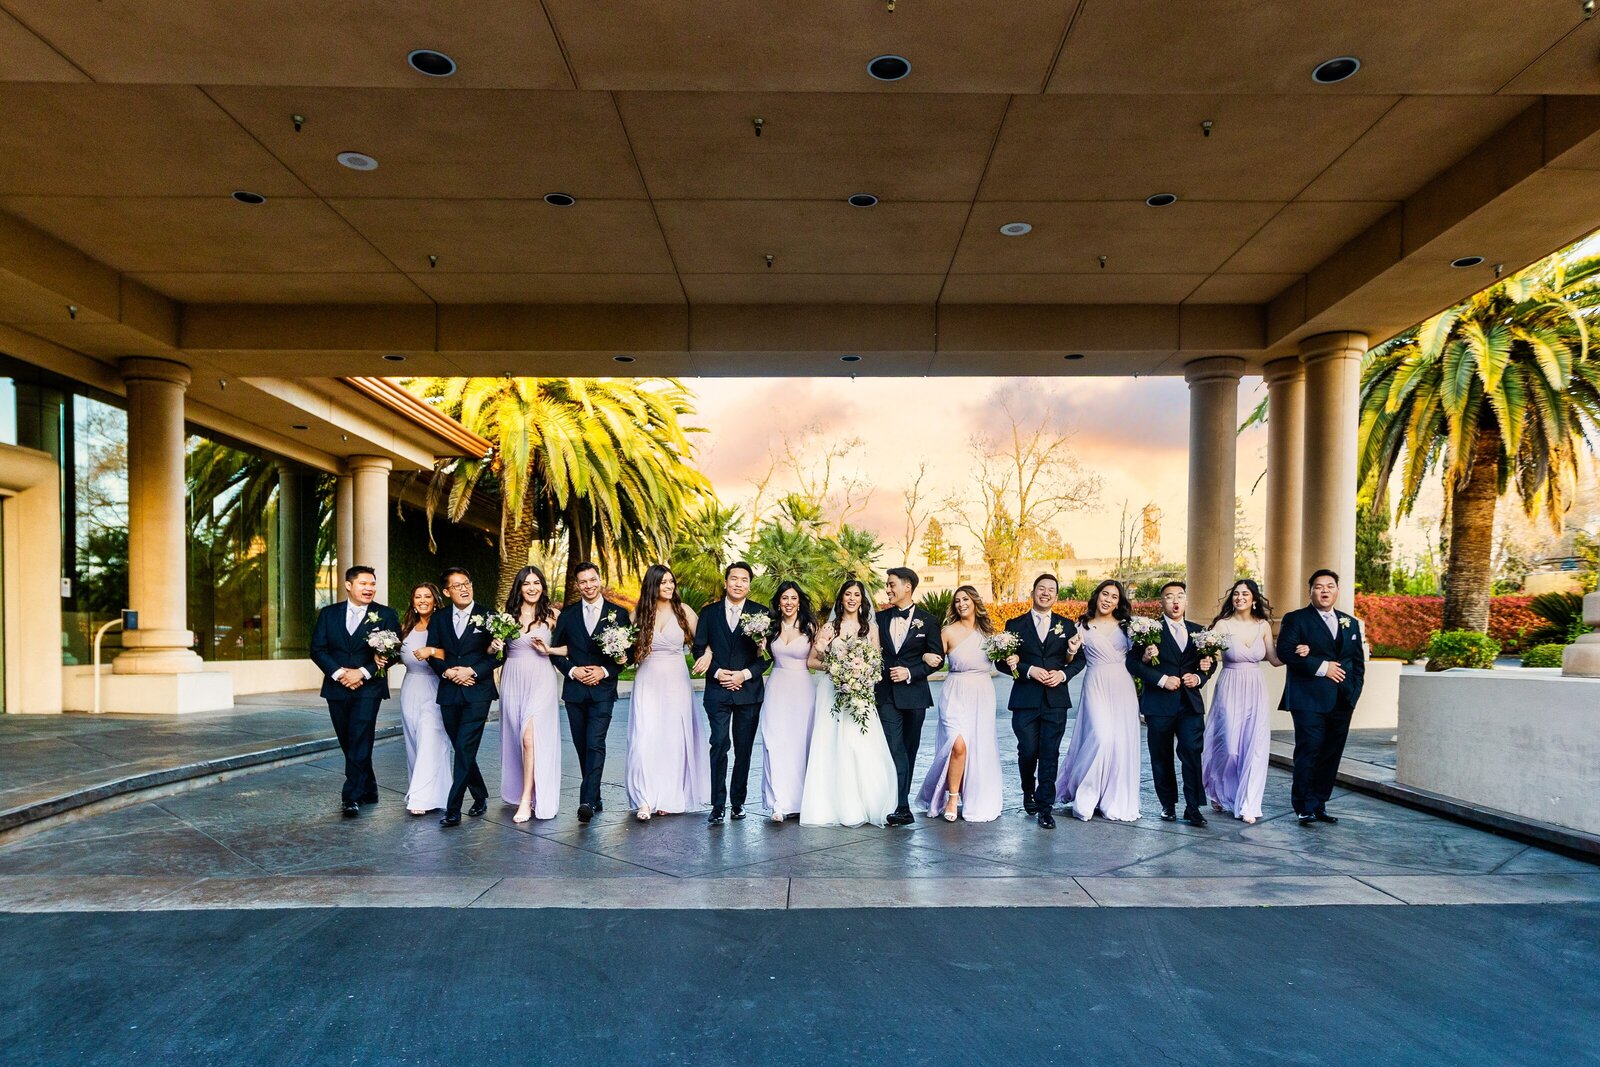 Bridal wedding party walks with each other arm in arm at Arden Hills in Sacramento under their awning with palm trees in the background. Photo by Sacramento wedding photographer, Philippe Studio Pro.